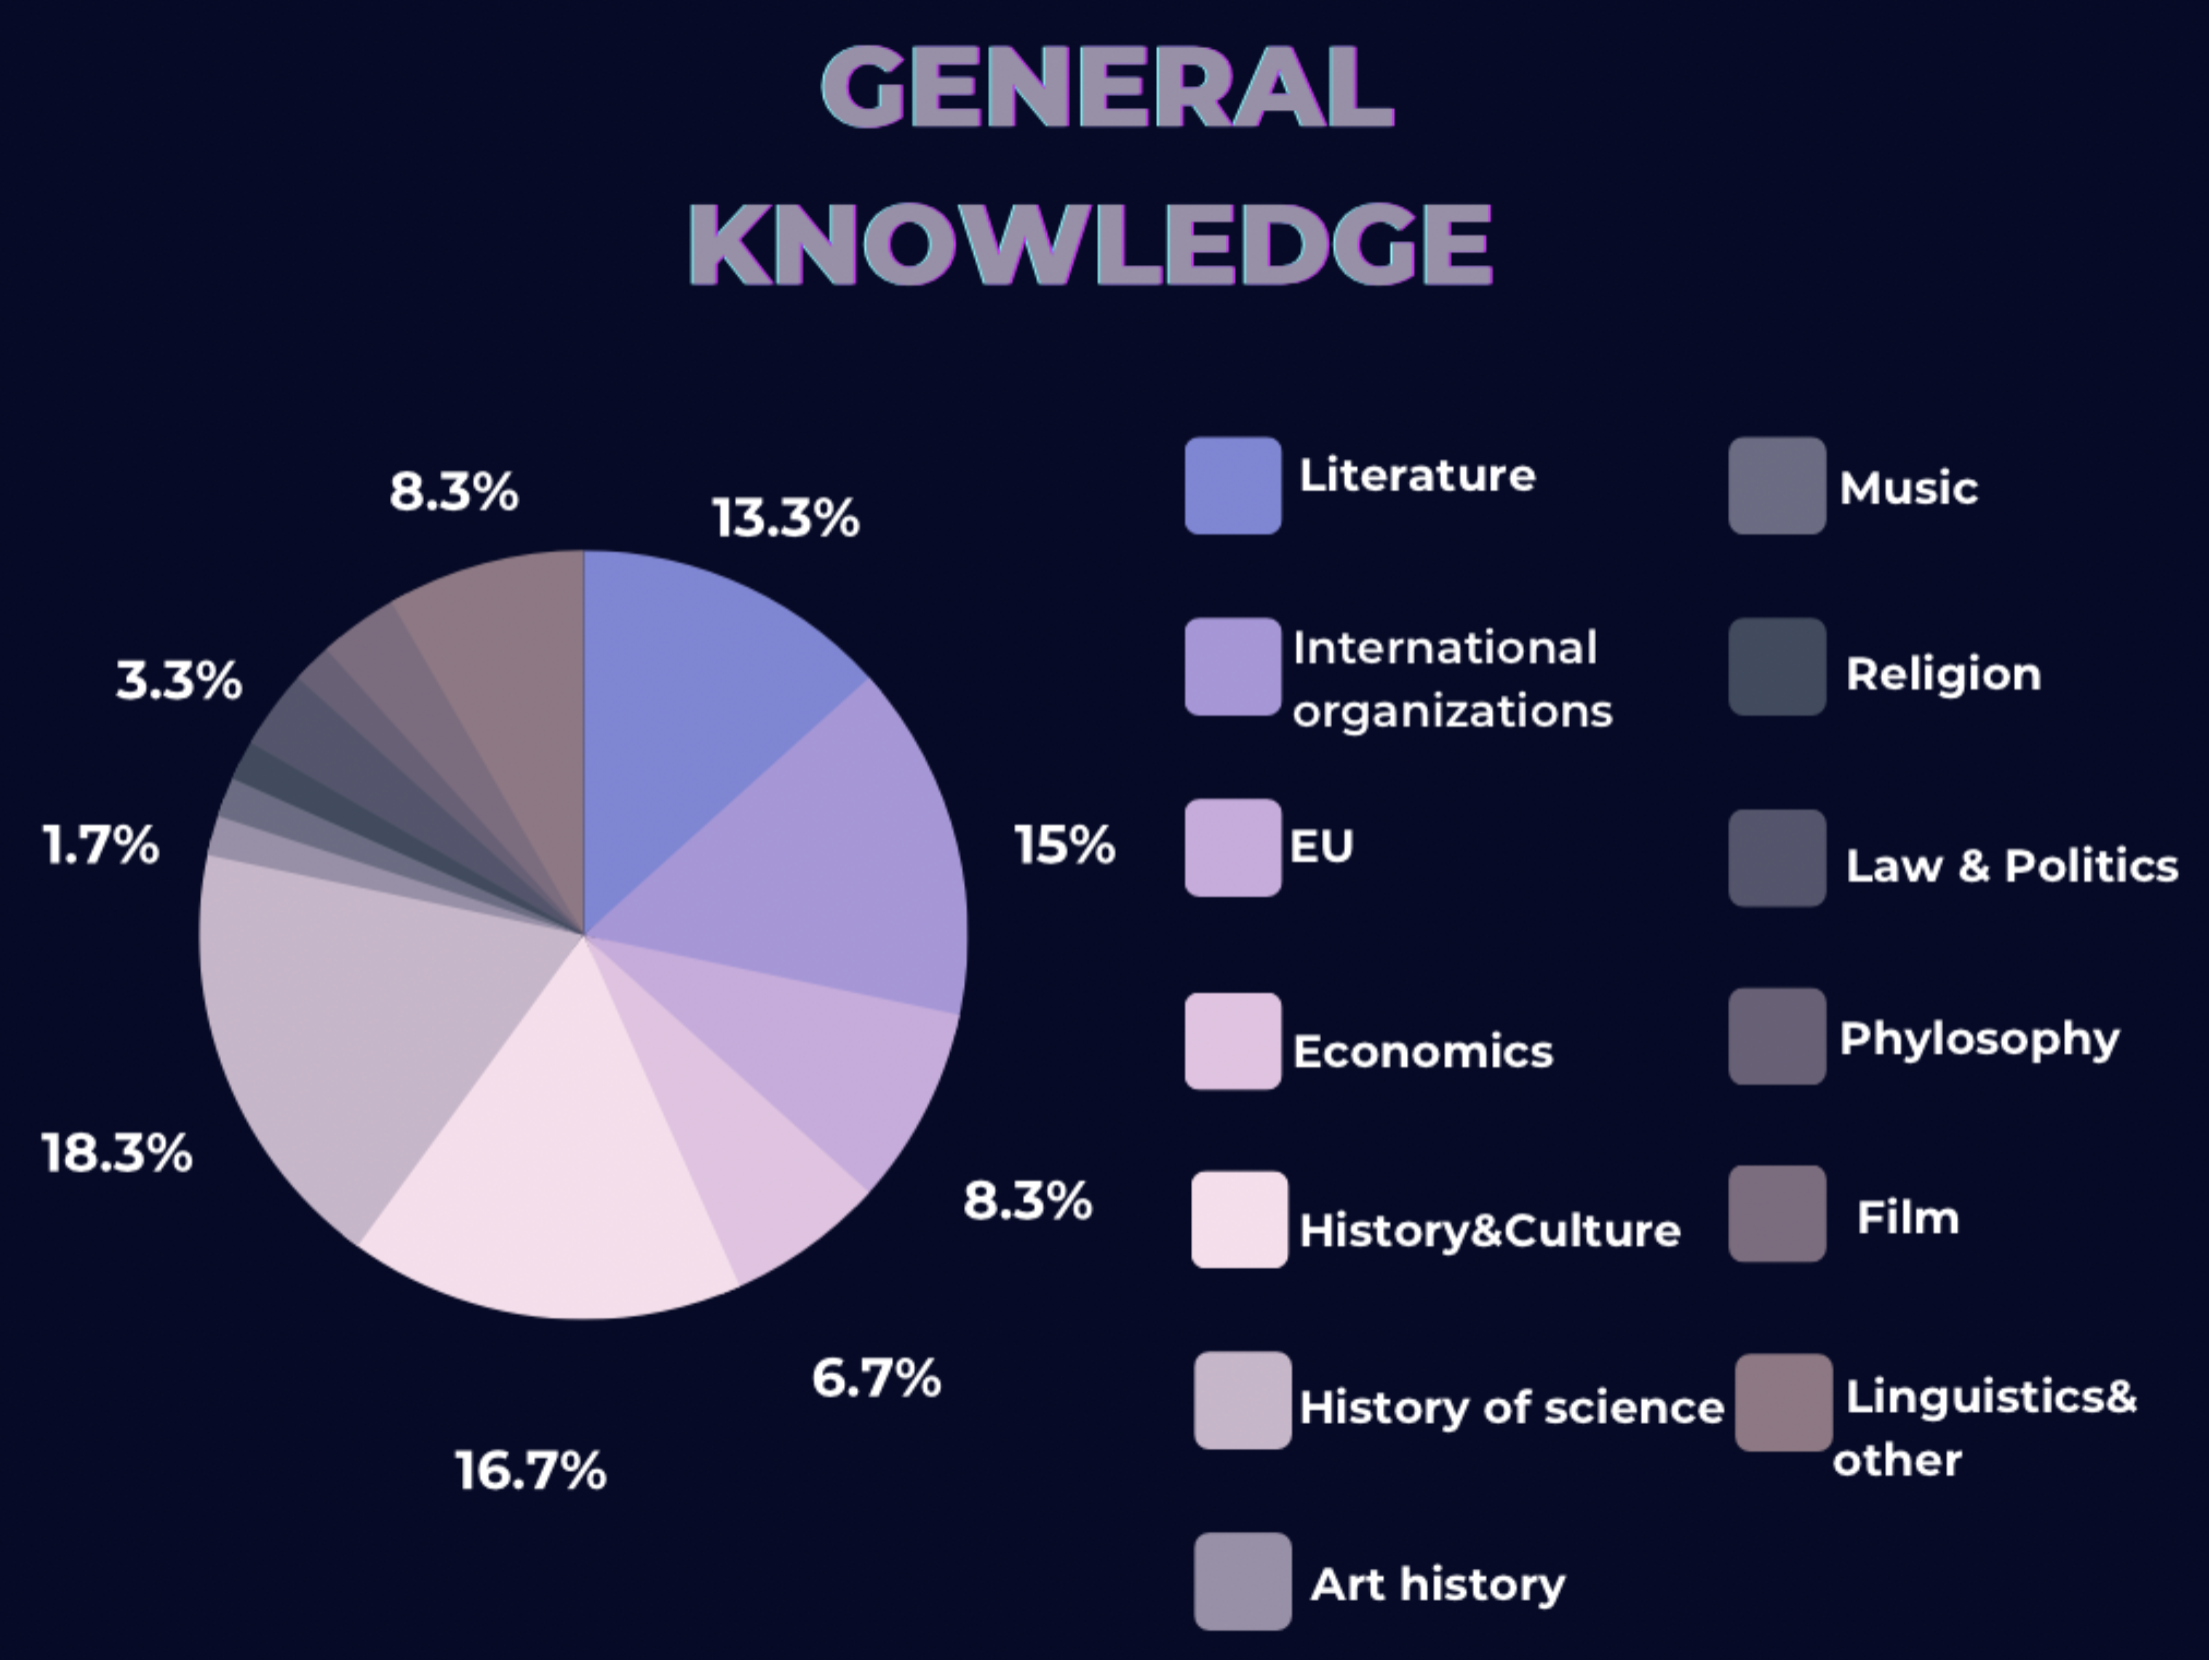 IMAT general knowledge section breakdown by topics 2011 to 2022